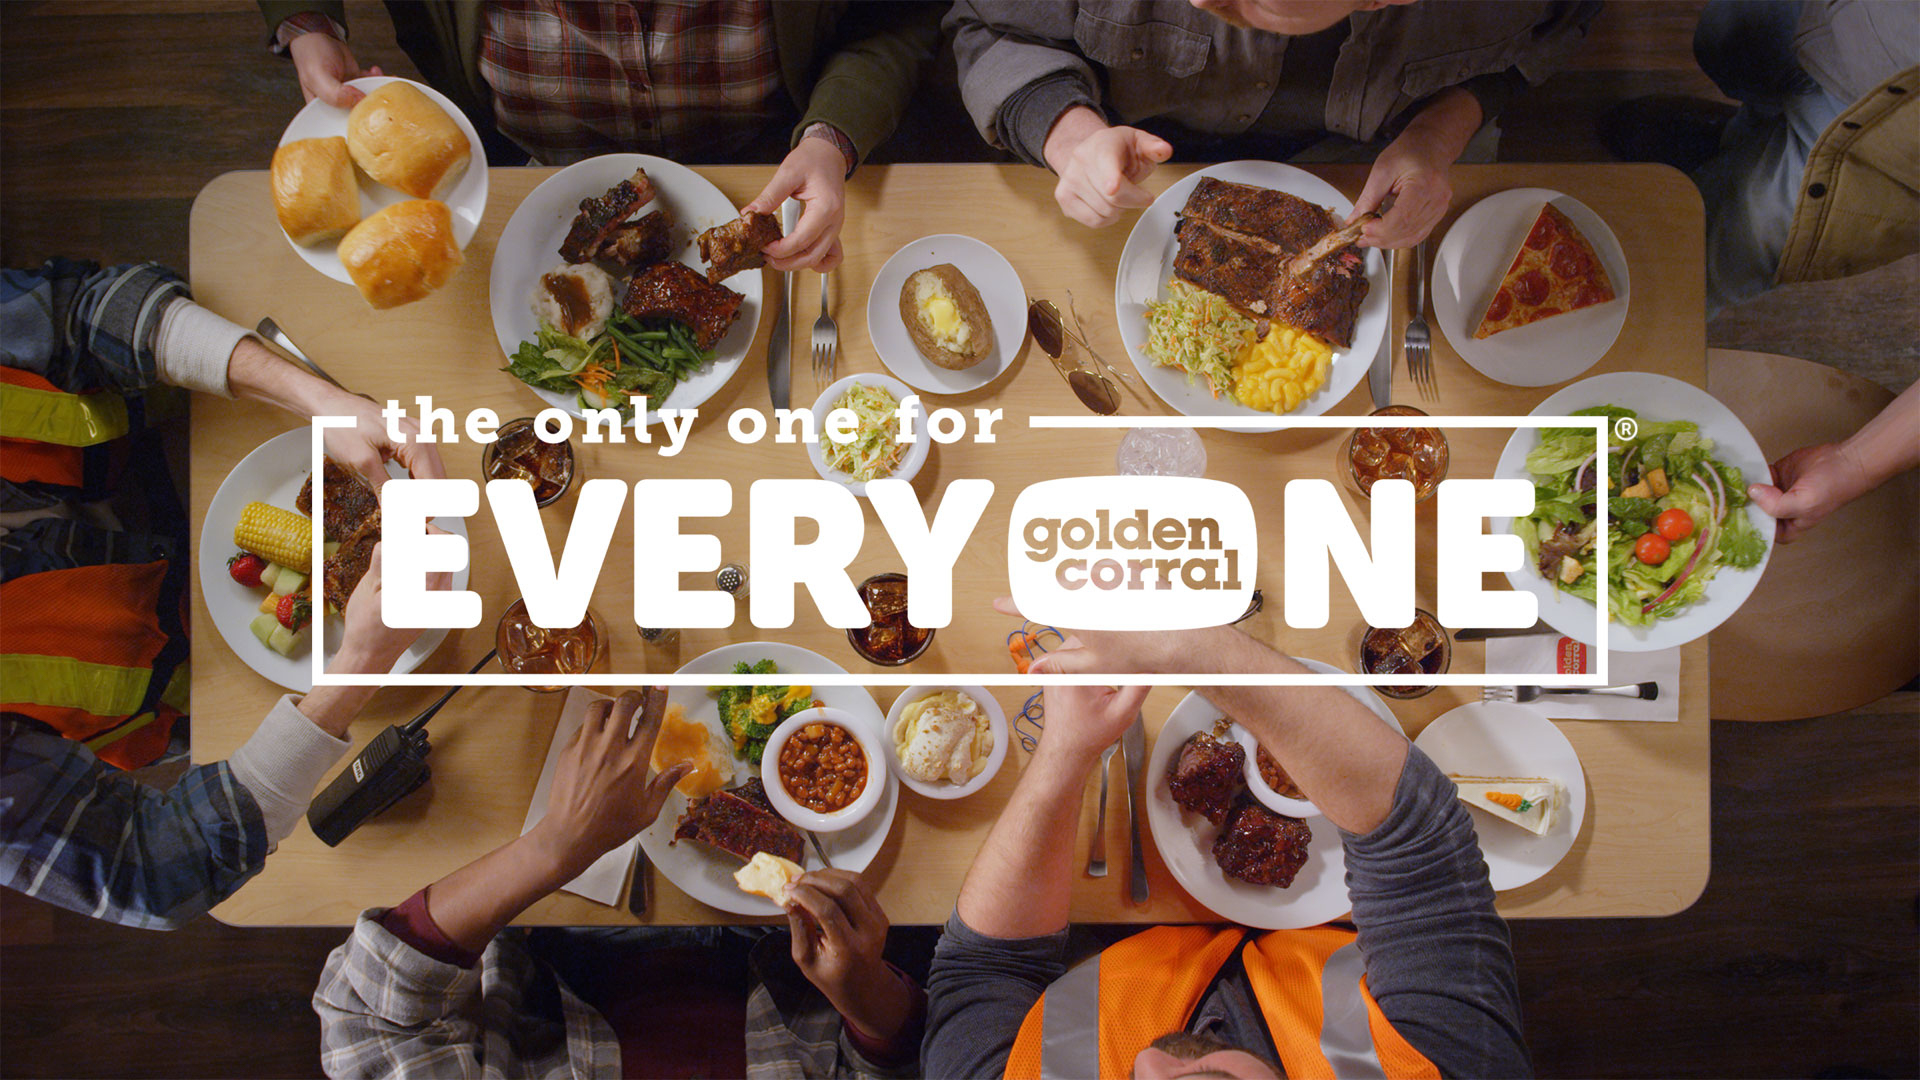 Golden Corral | You can pick up a promotional card that will get you a free lunch or diner buffet.